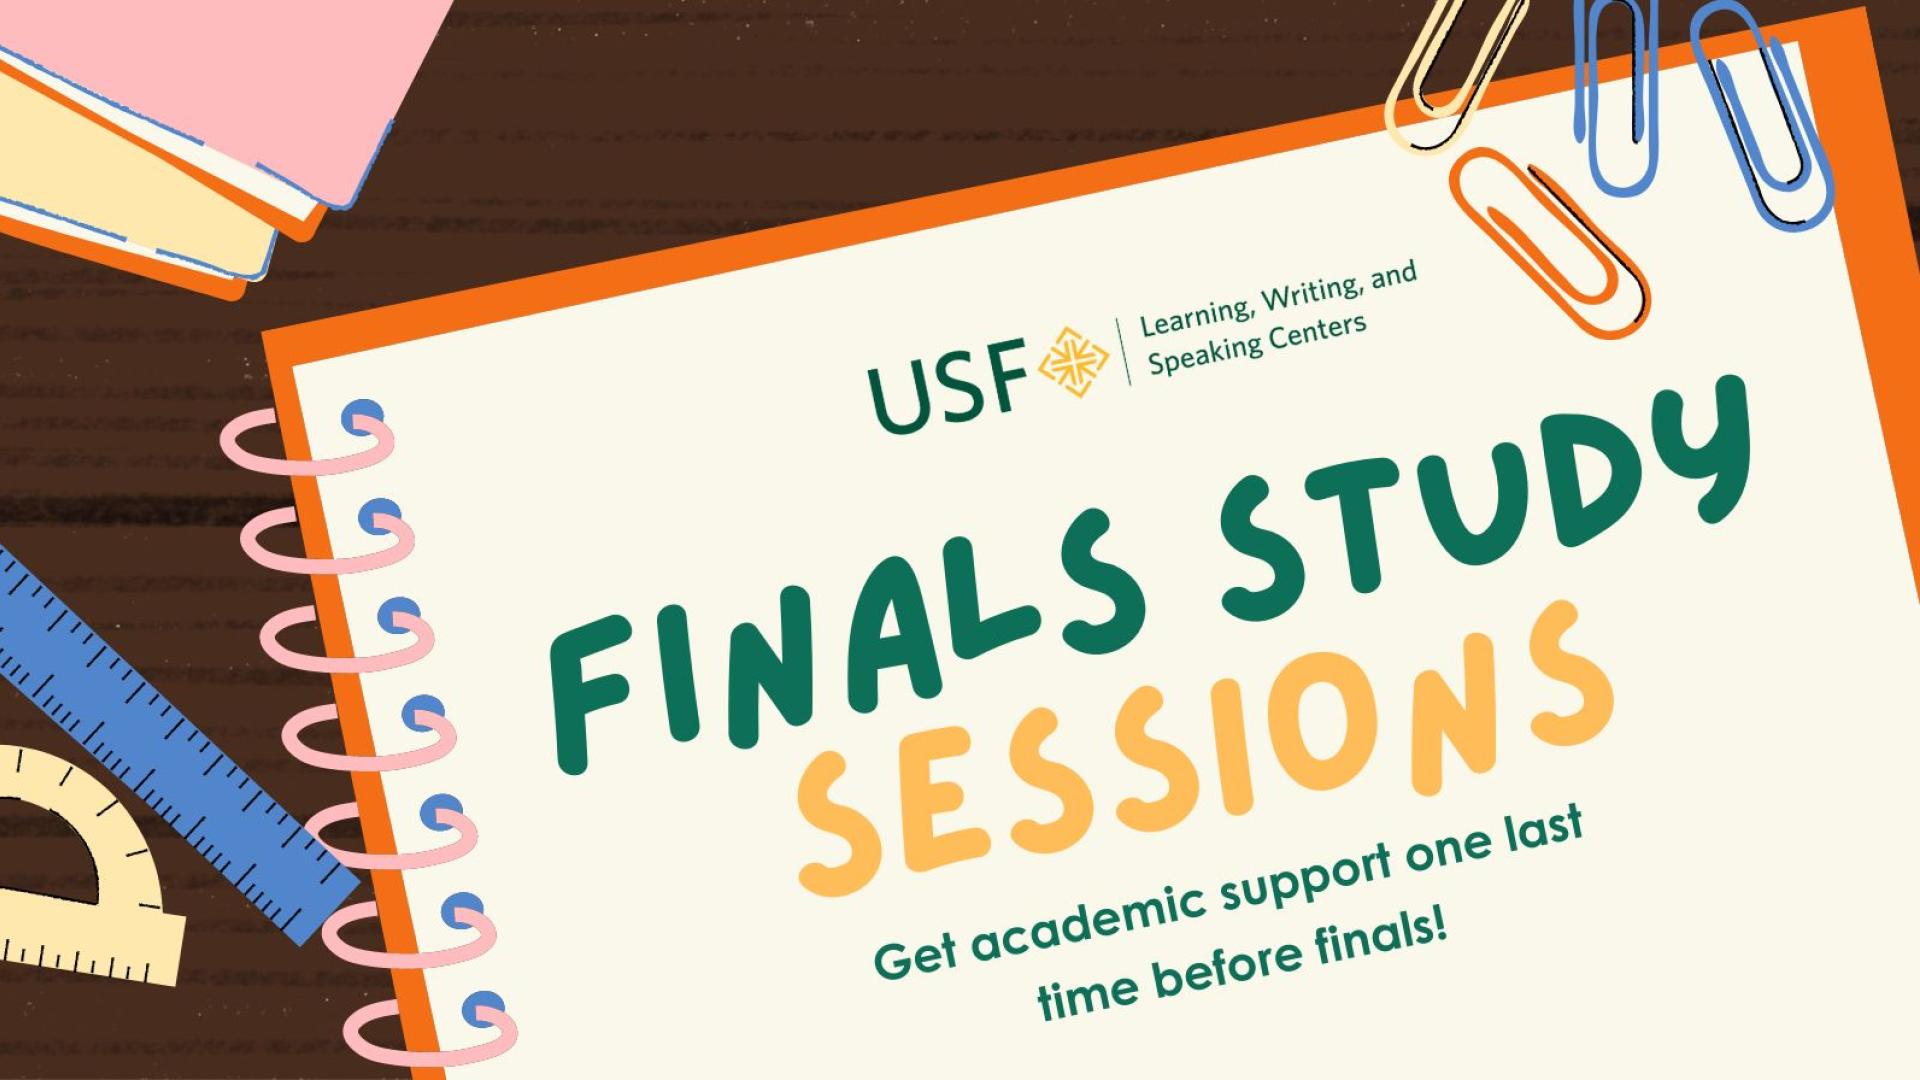 Image of notebook cover with the following text, USF, The Learning, Writing, and Speaking Centers. Finals Study Sessions. Get academic support one last time before Finals!